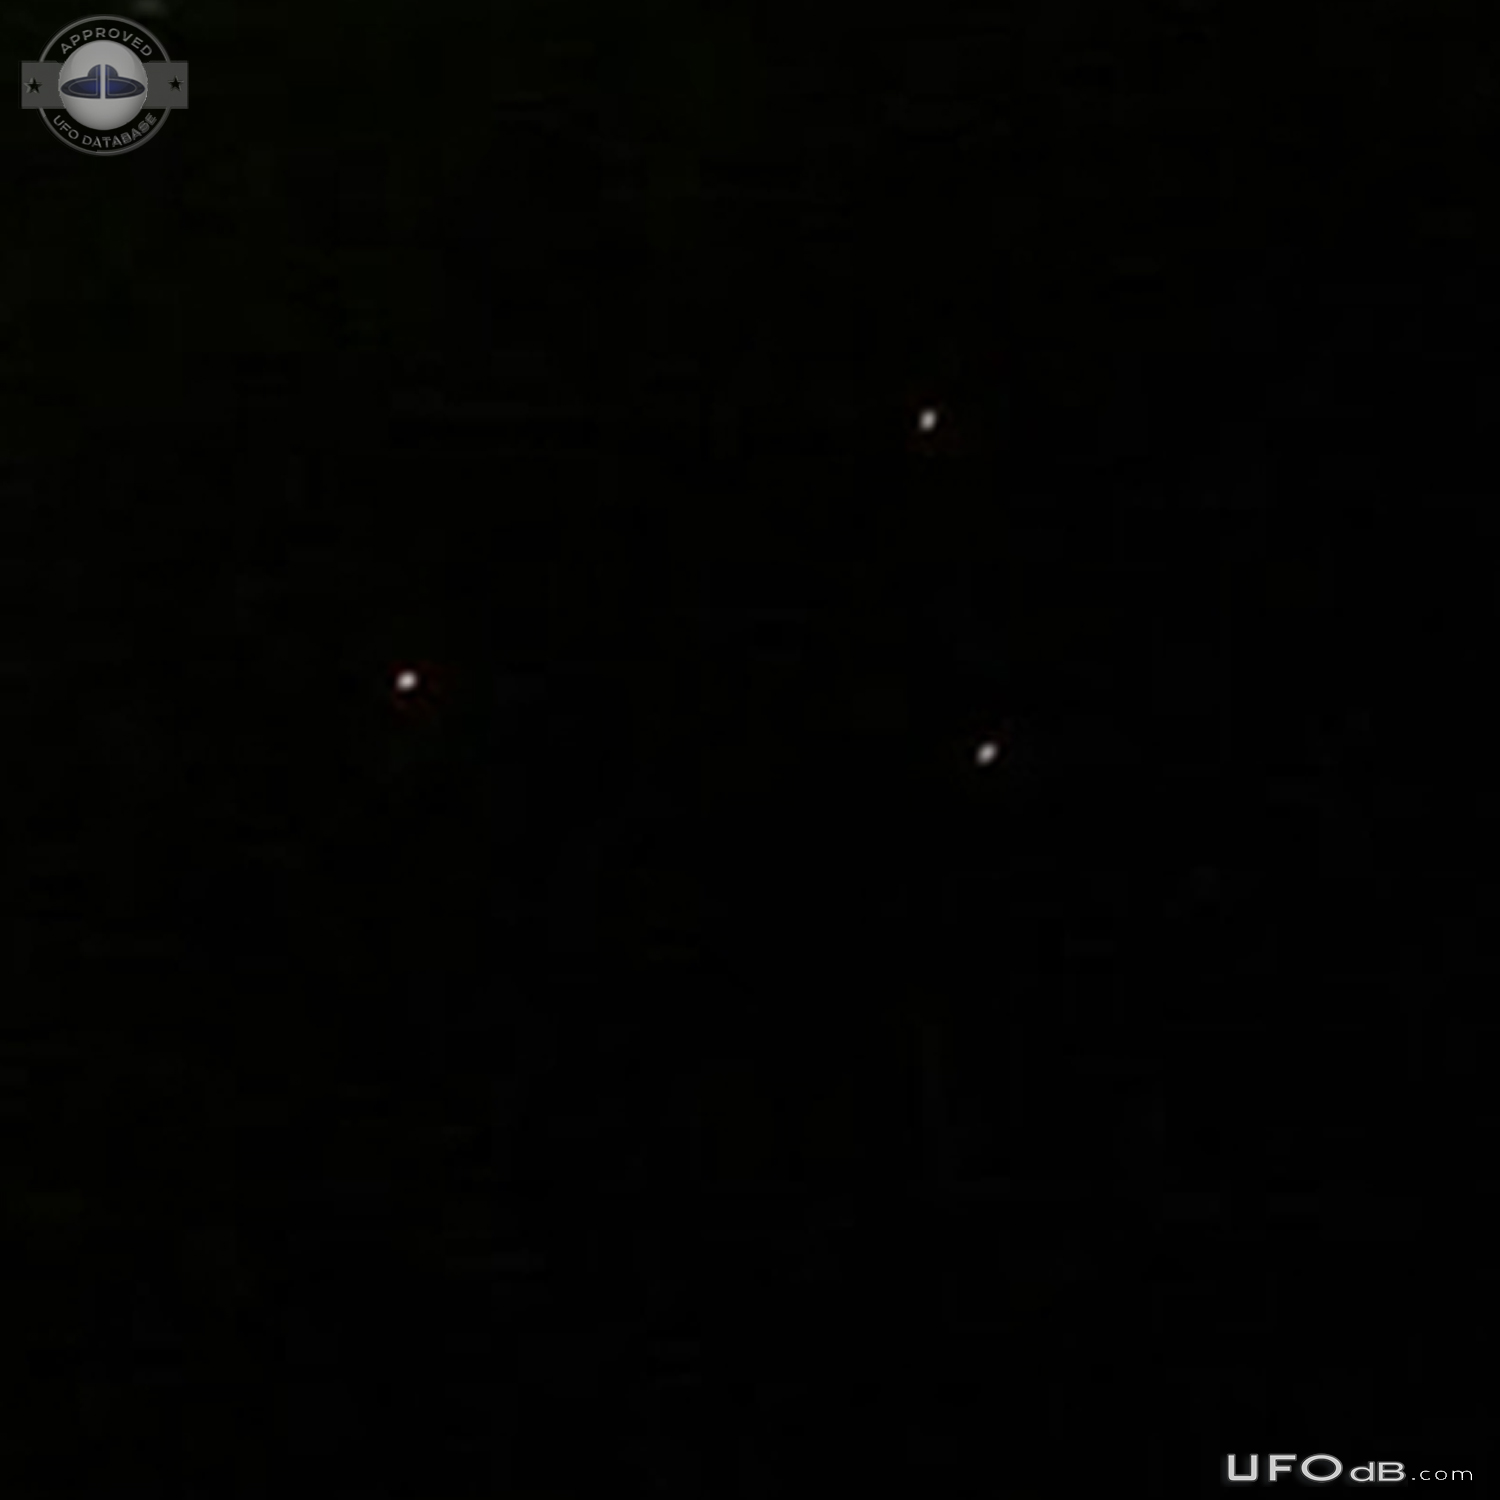 UFO Lights in triangle formation on picture - North Bay Ontario - 2015 UFO Picture #694-4